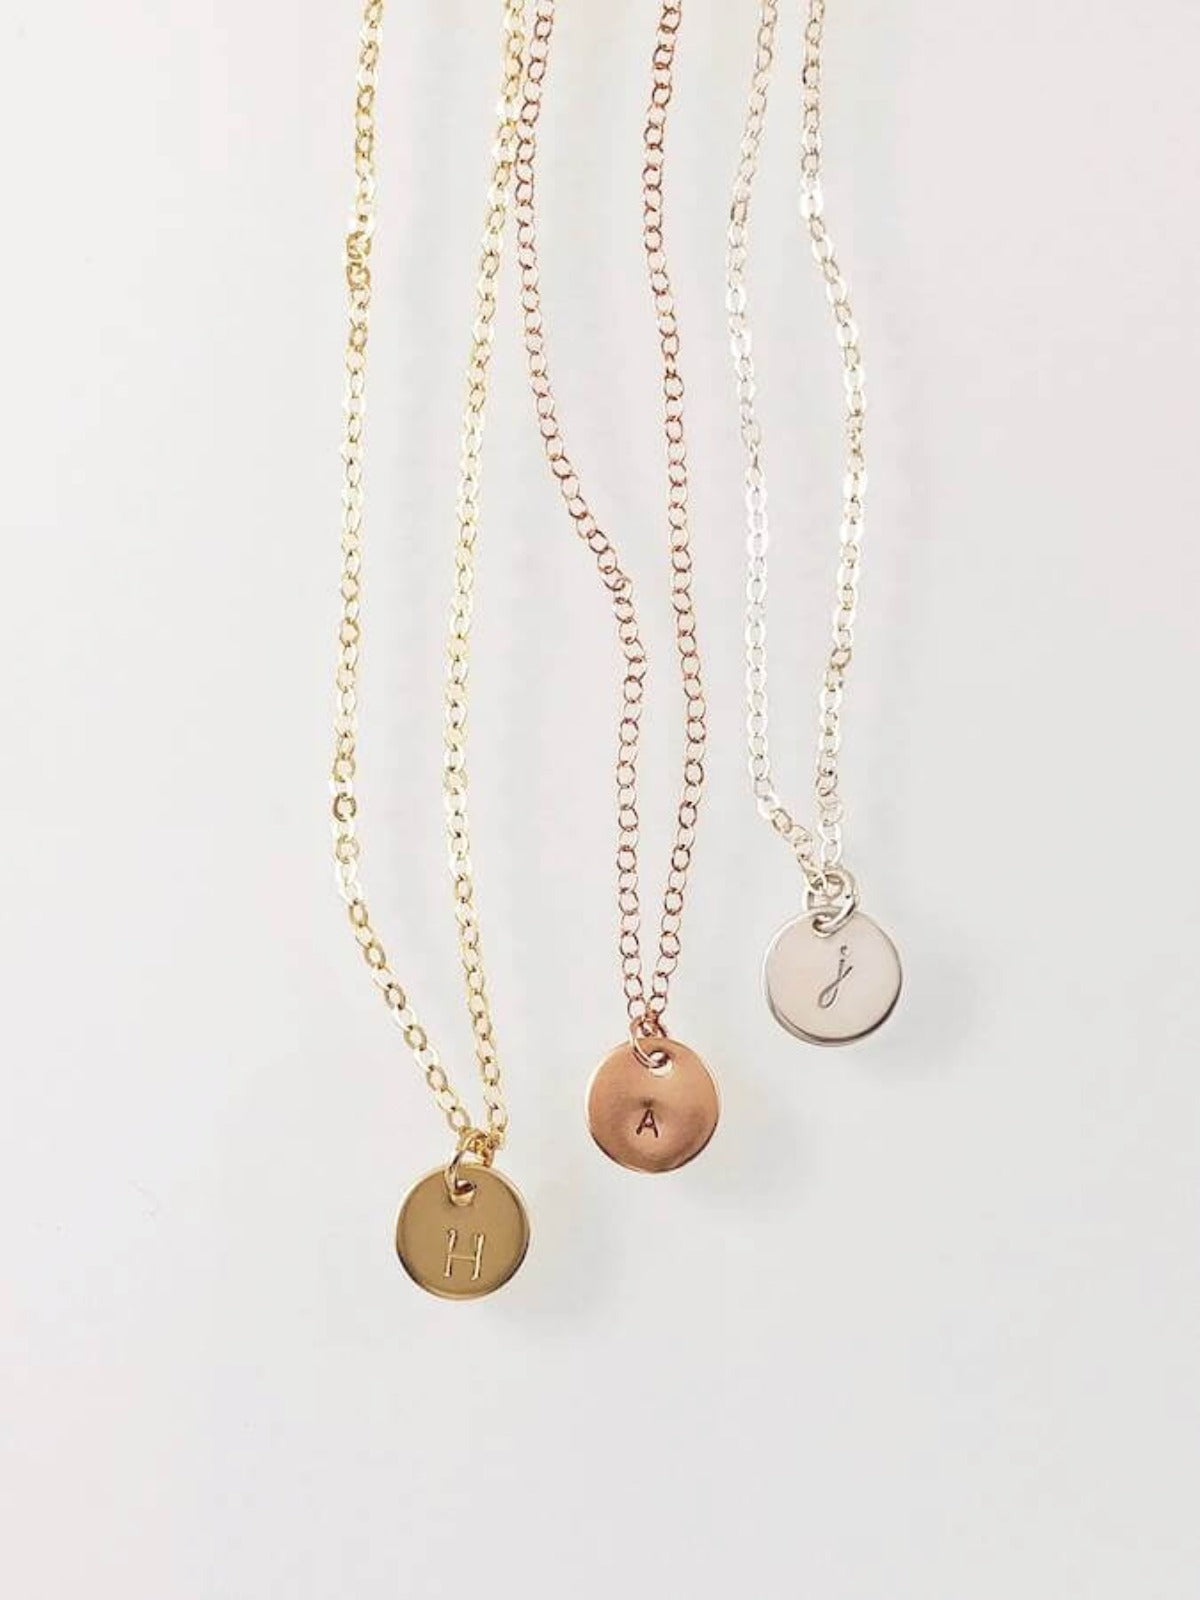 Sydney - Small Round Initials Pendant Necklace